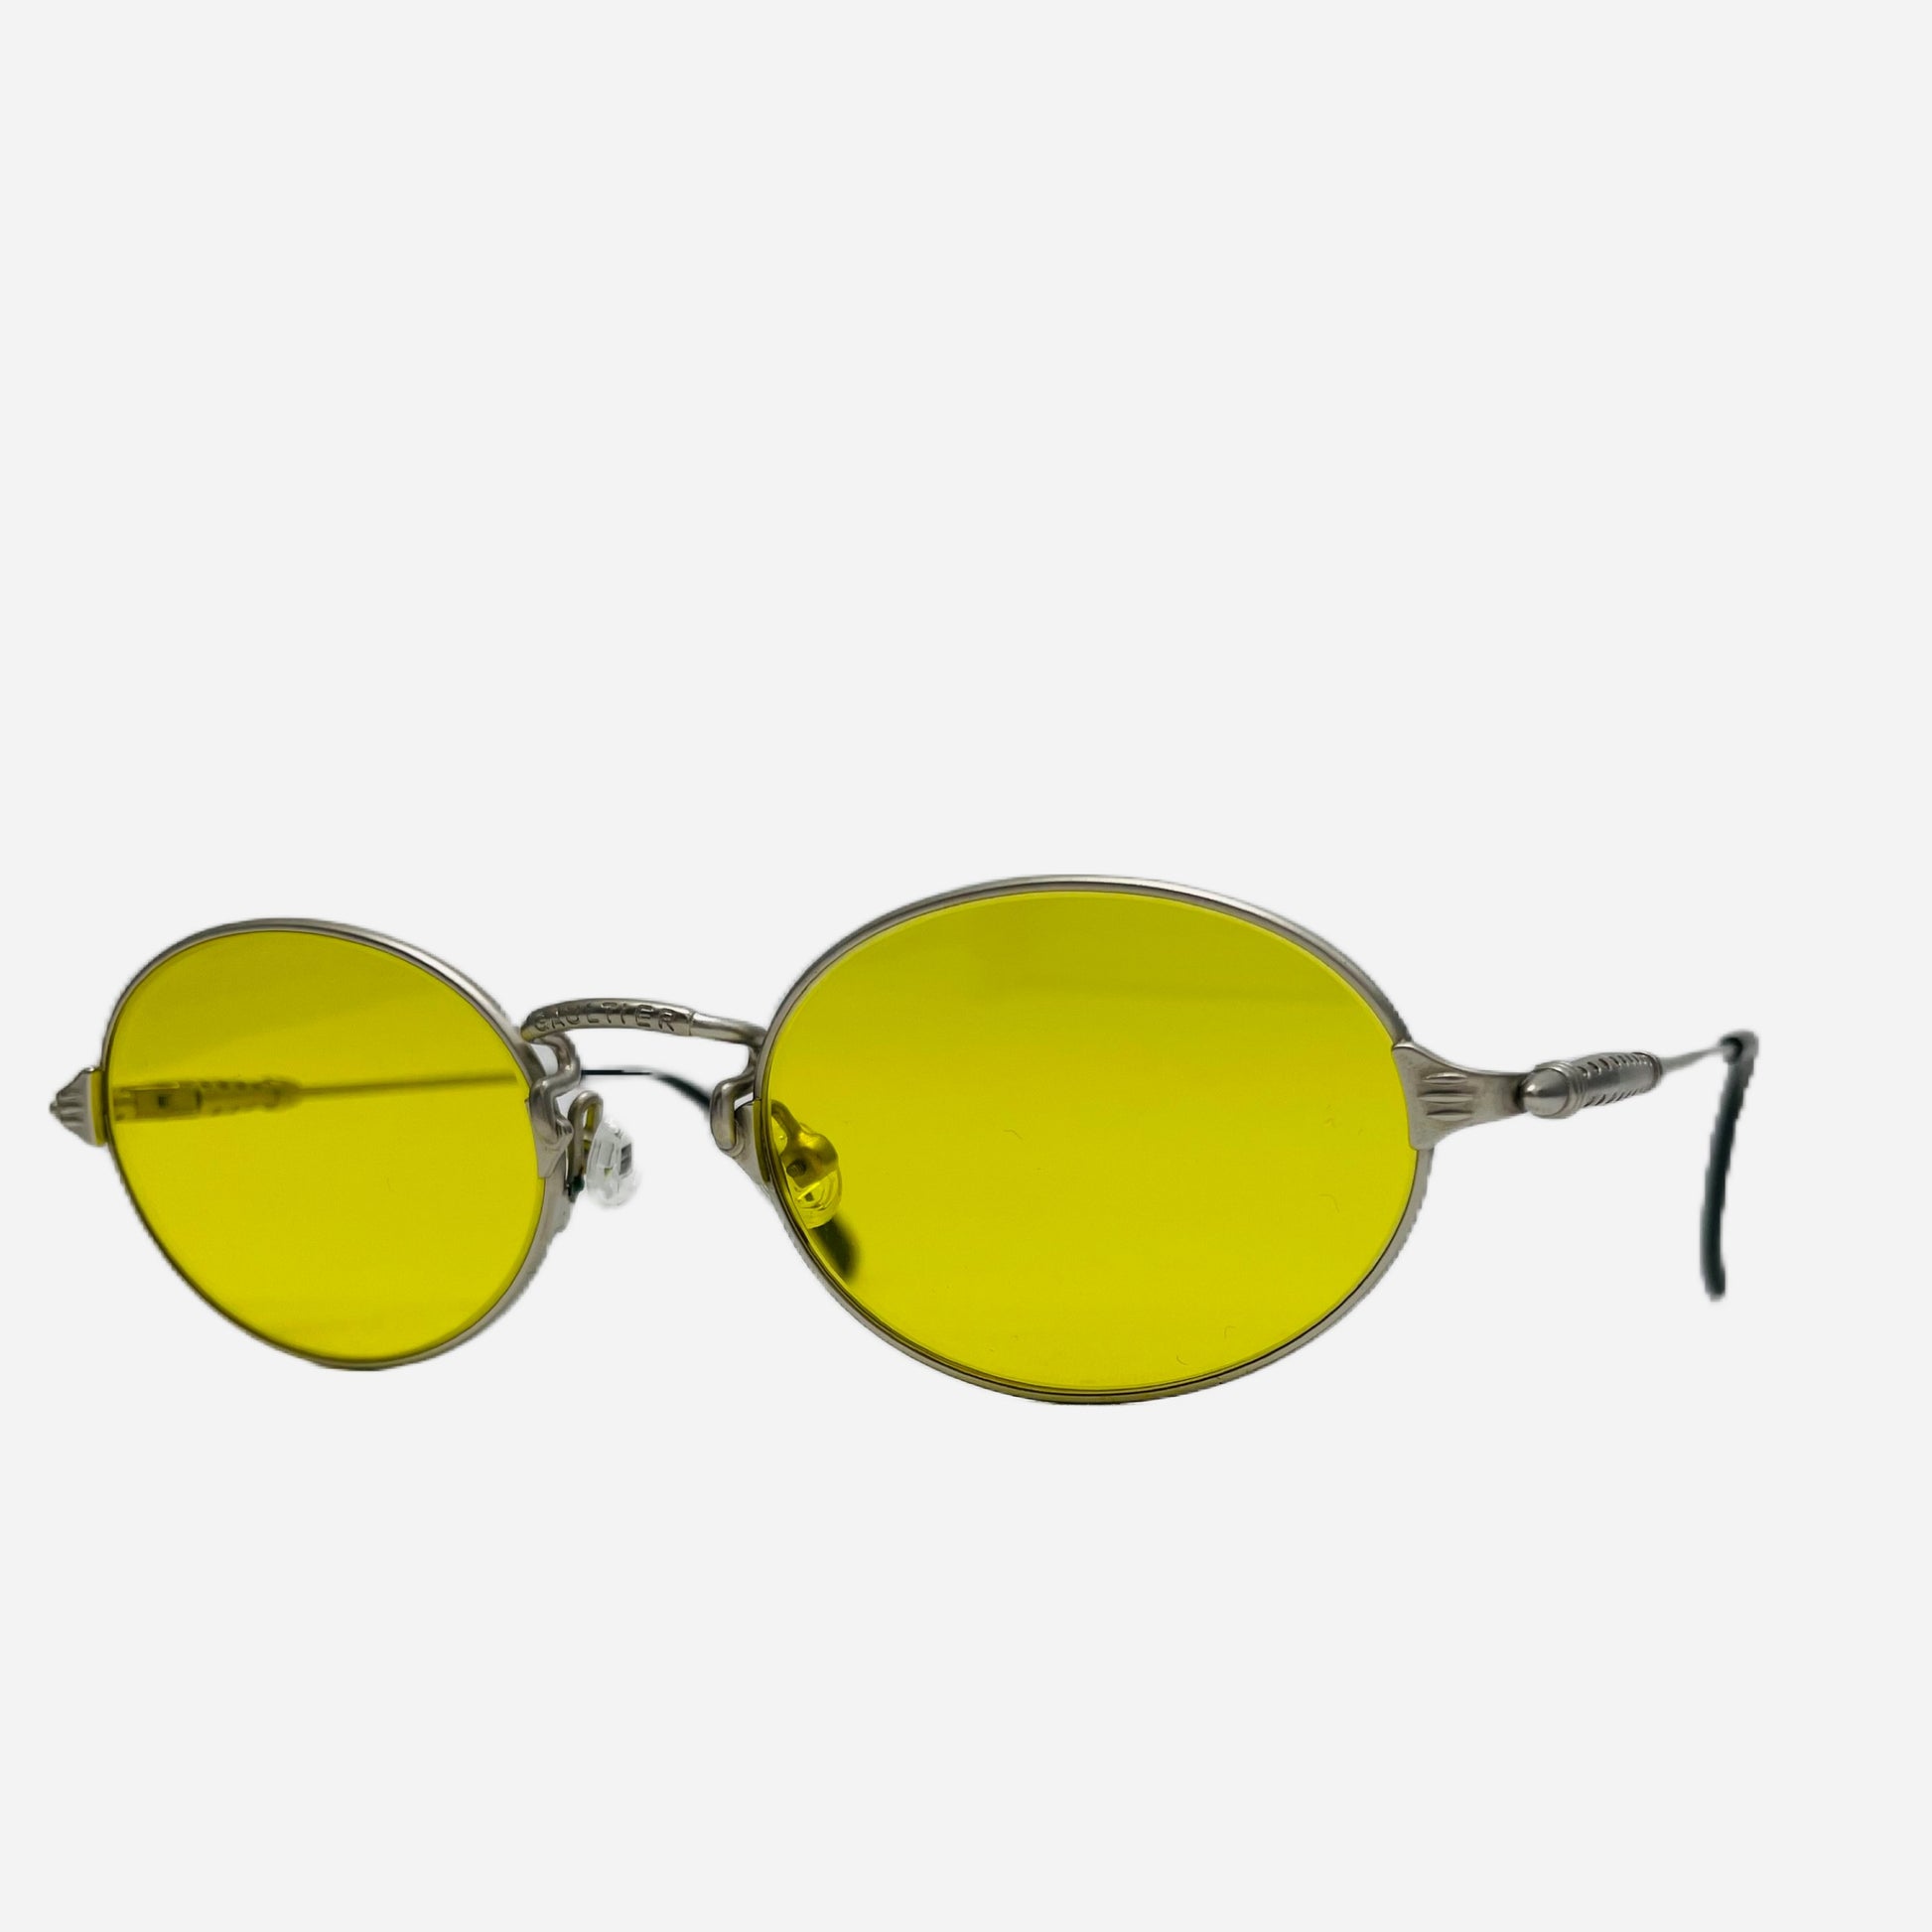 Vintage-Jean-Paul-Gaultier-Sonnenbrille-Sunglasses-Model-55-6108-made-in-japan-the-seekers-front